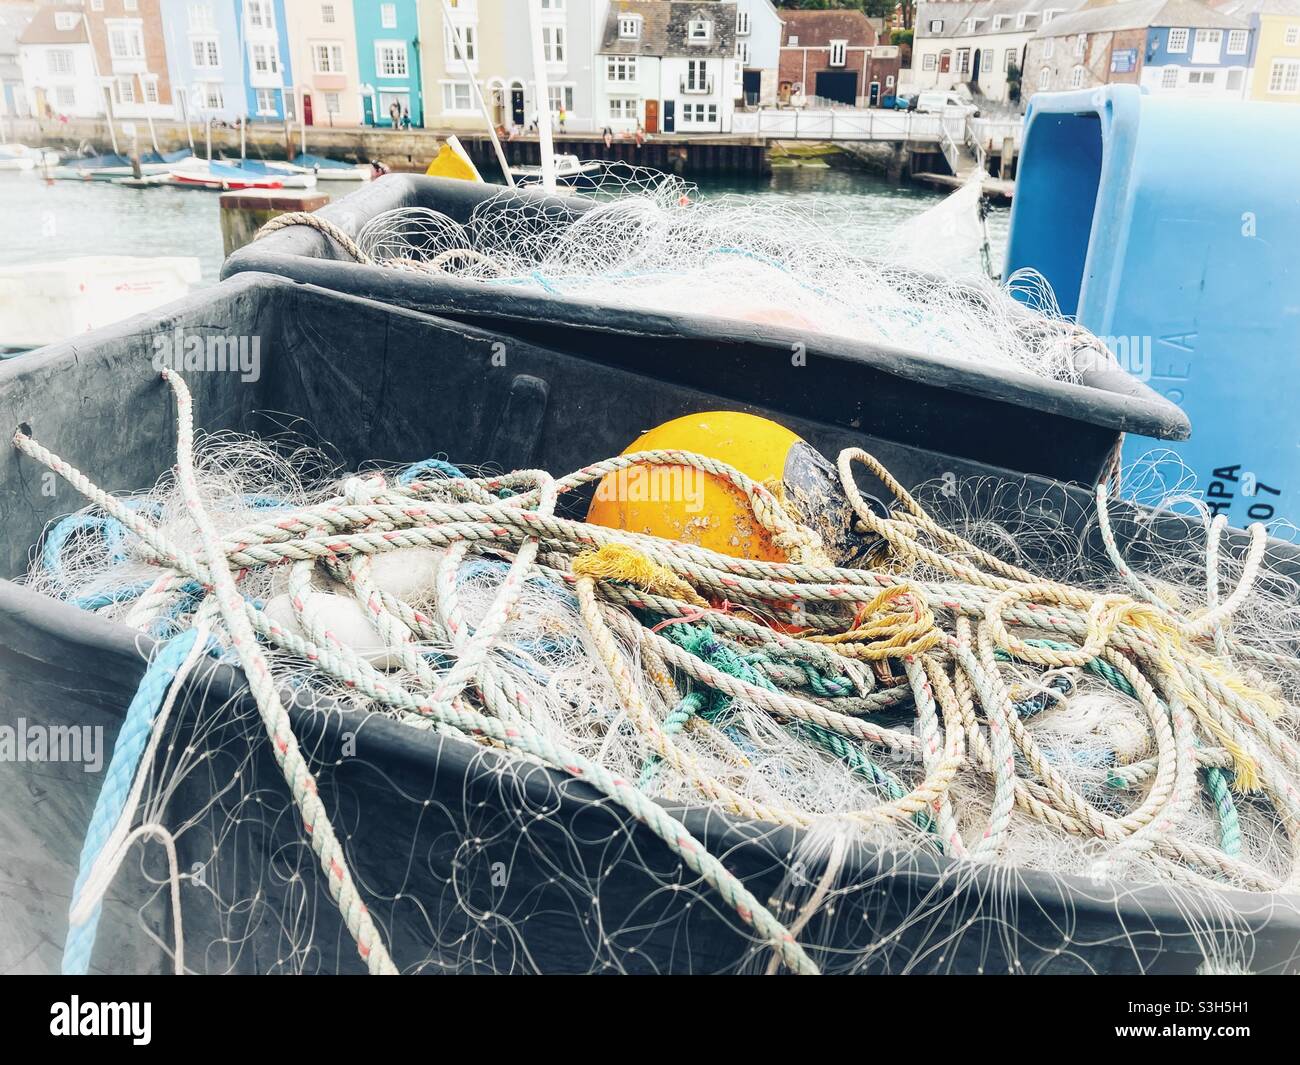 Fishing nets and floats in containers on the quayside of a harbour Stock Photo